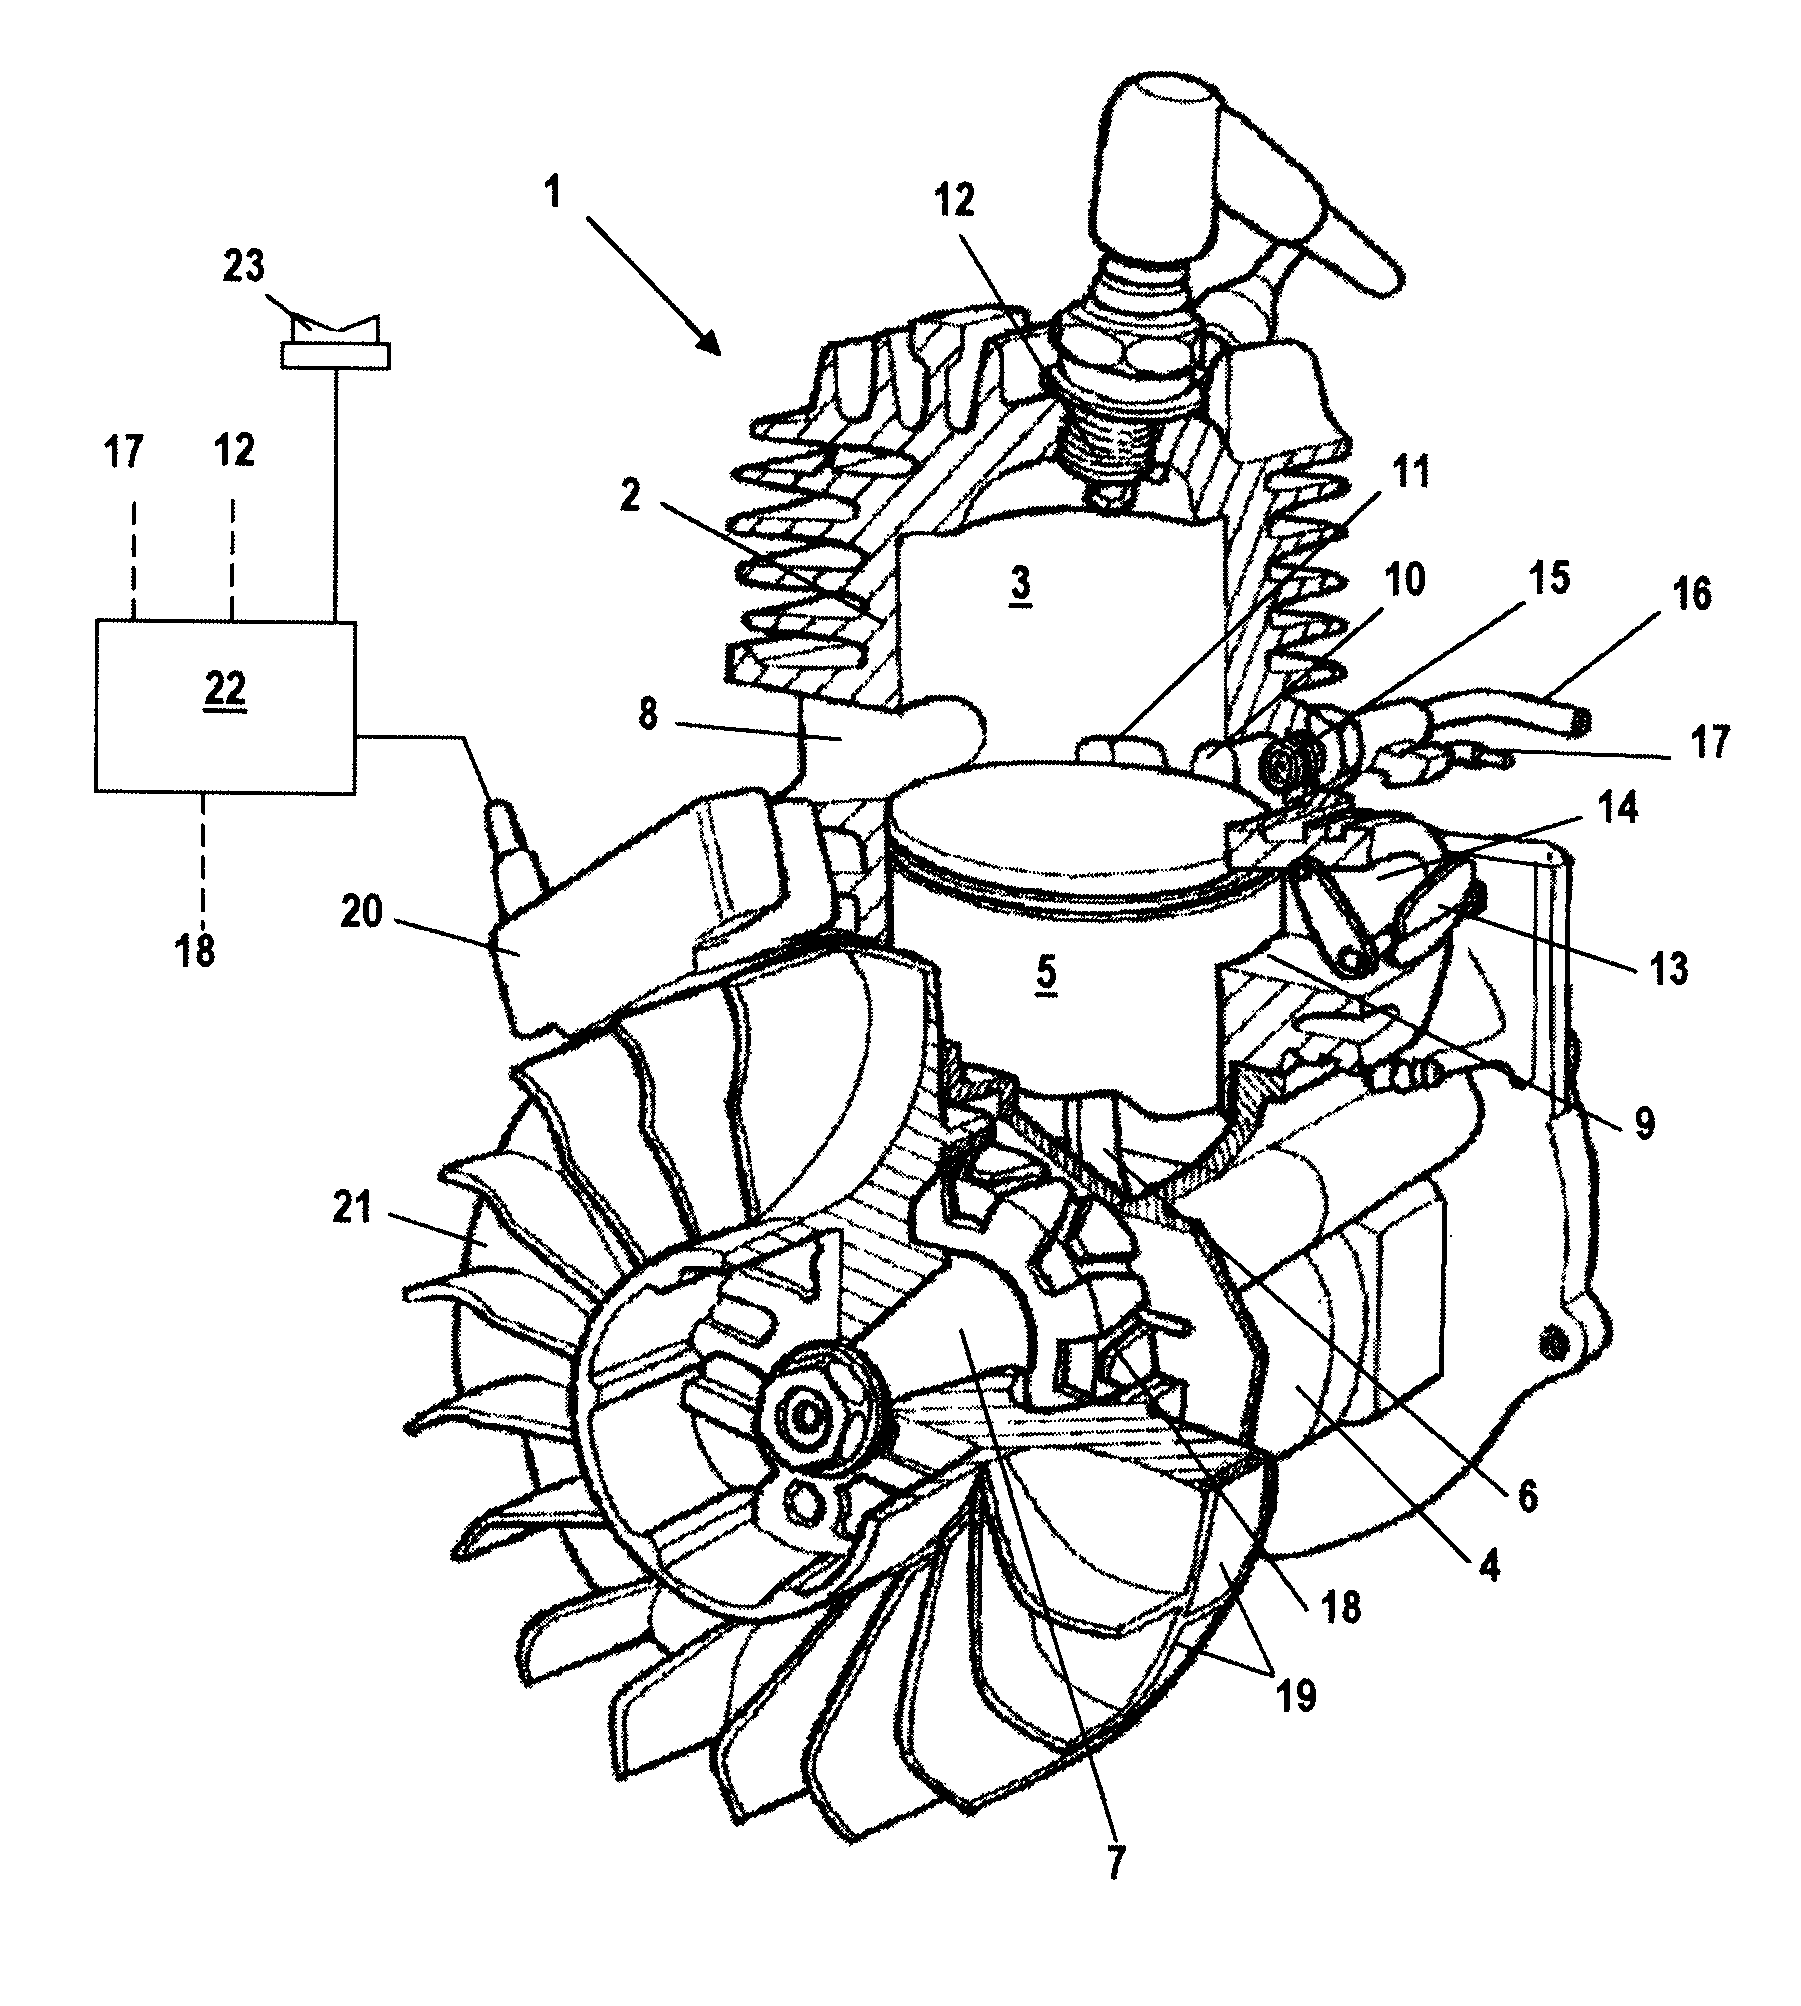 Method for operating a two-stroke engine